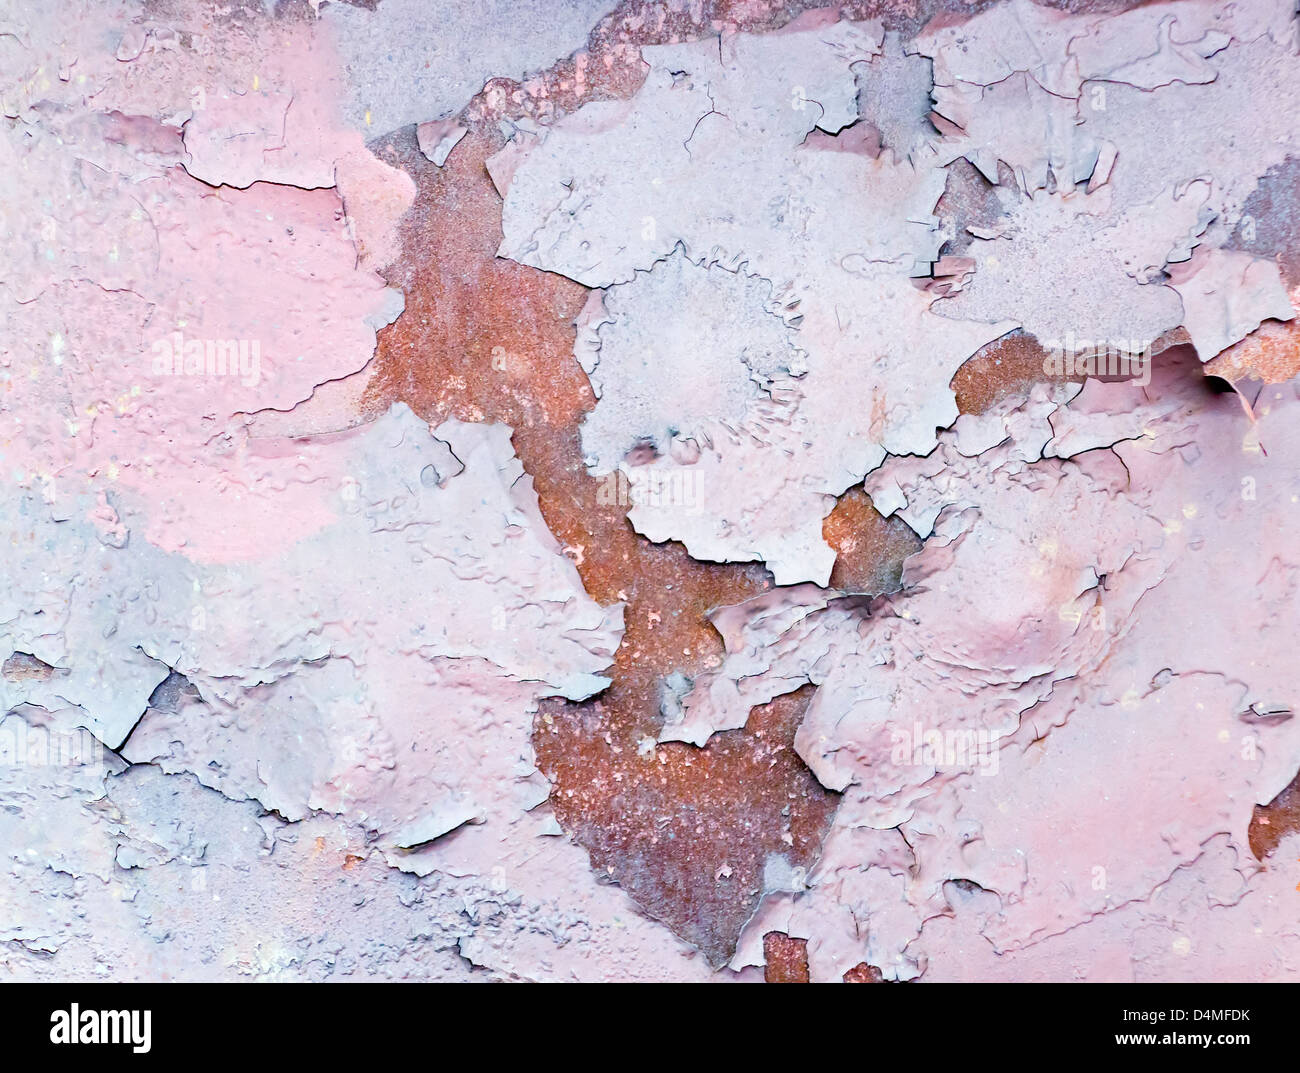 rough and cracked surface - abstract texture Stock Photo